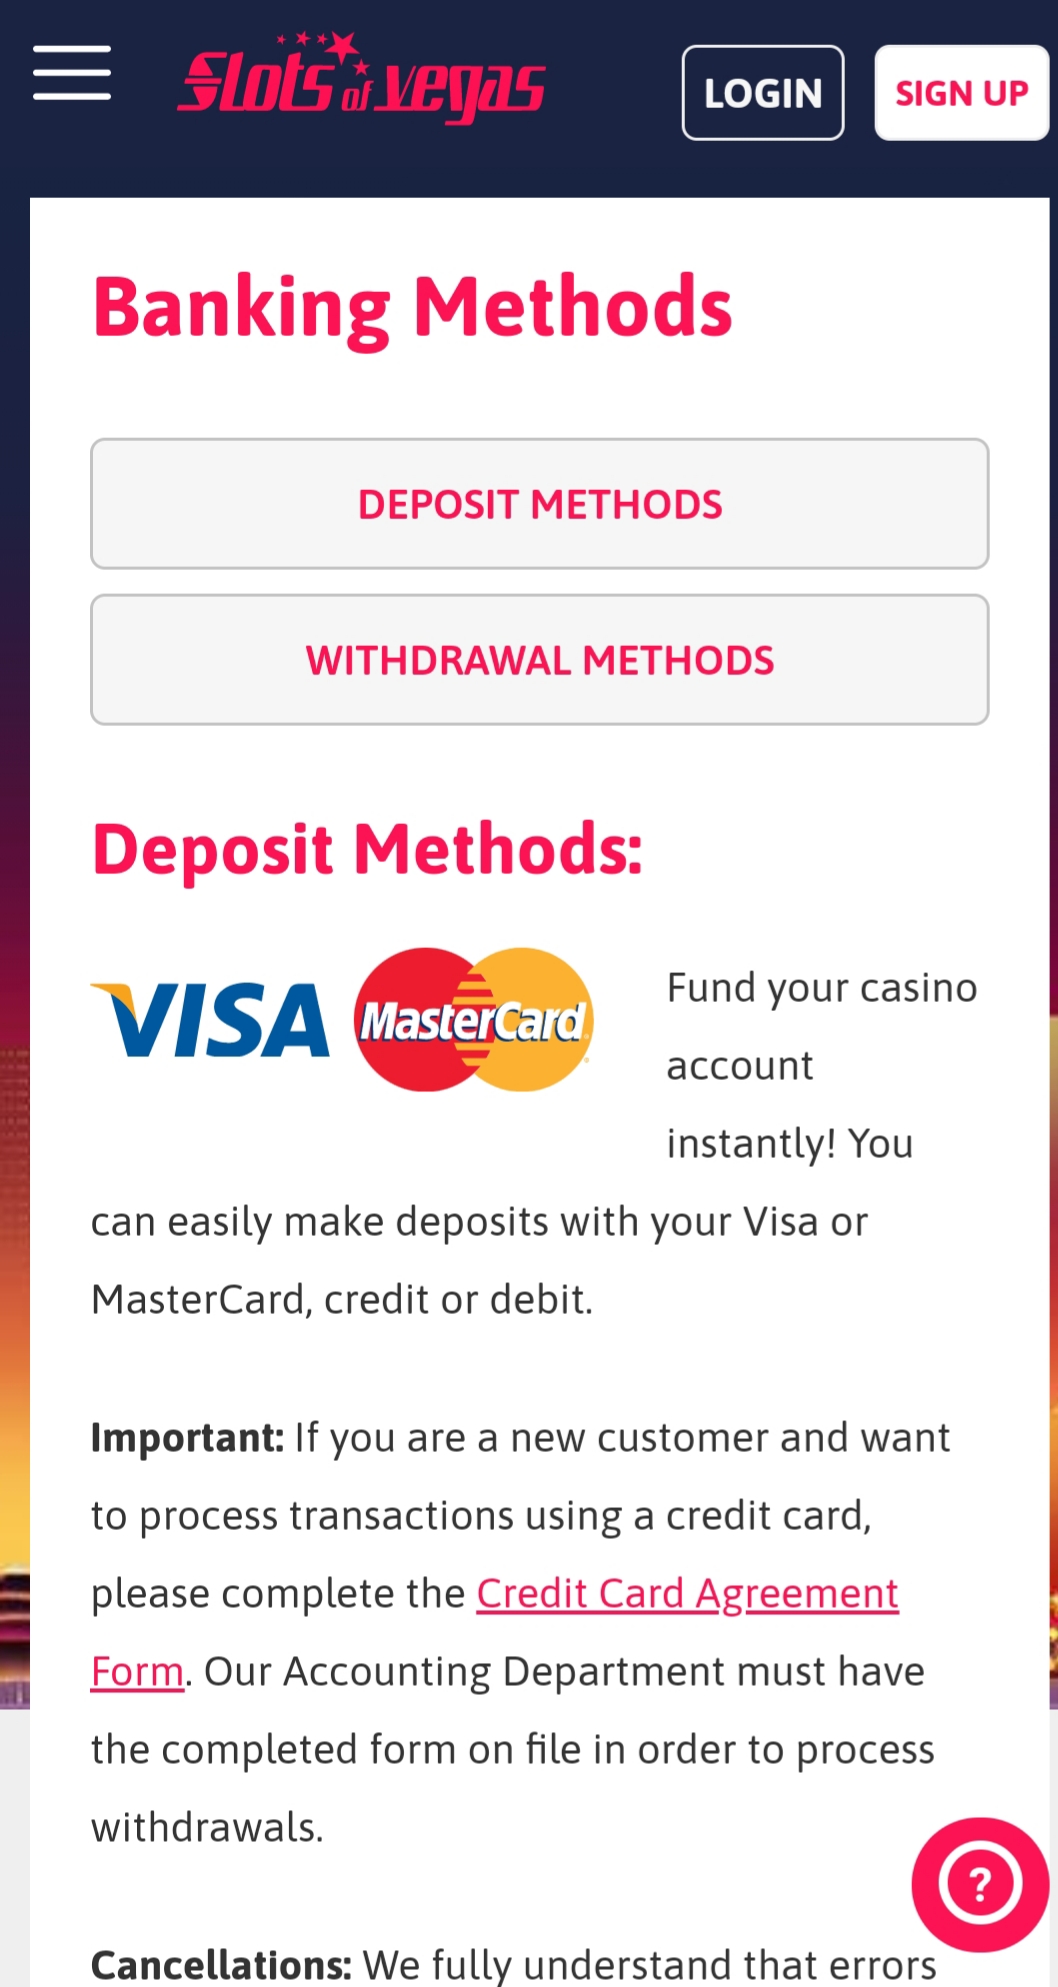 Slots of Vegas Casino Mobile Payment Methods Review